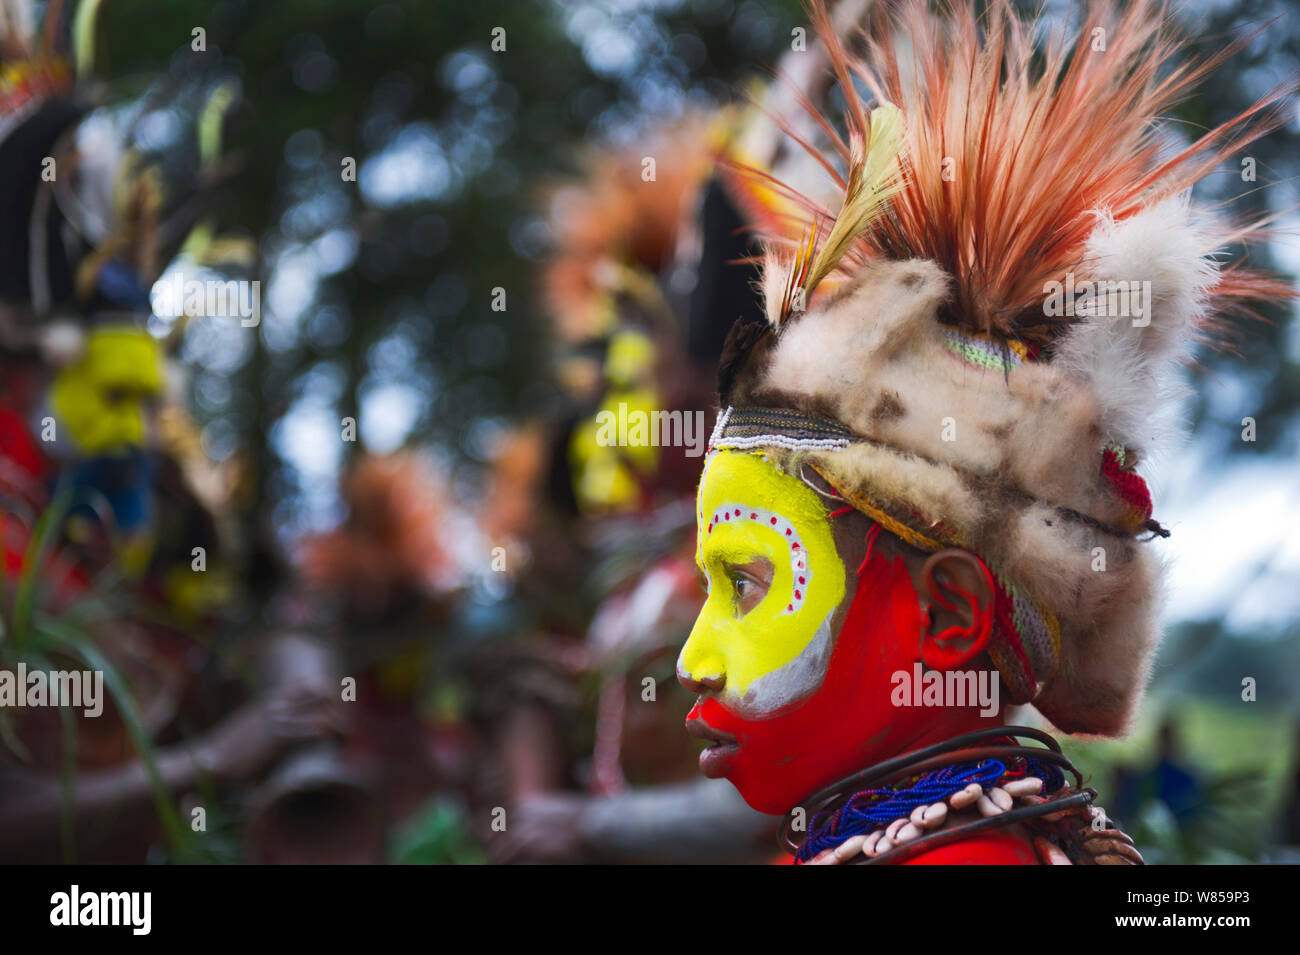 Huli Wigmen from the Tari Valley in the Southern Highlands, Papua New Guinea at a Sing-sing, Mount Hagen Papua, New Guinea. Wearing bird of paradise feathers and plumes particularly Raggiana Bird of Paradise plumes. August 2011 Stock Photo